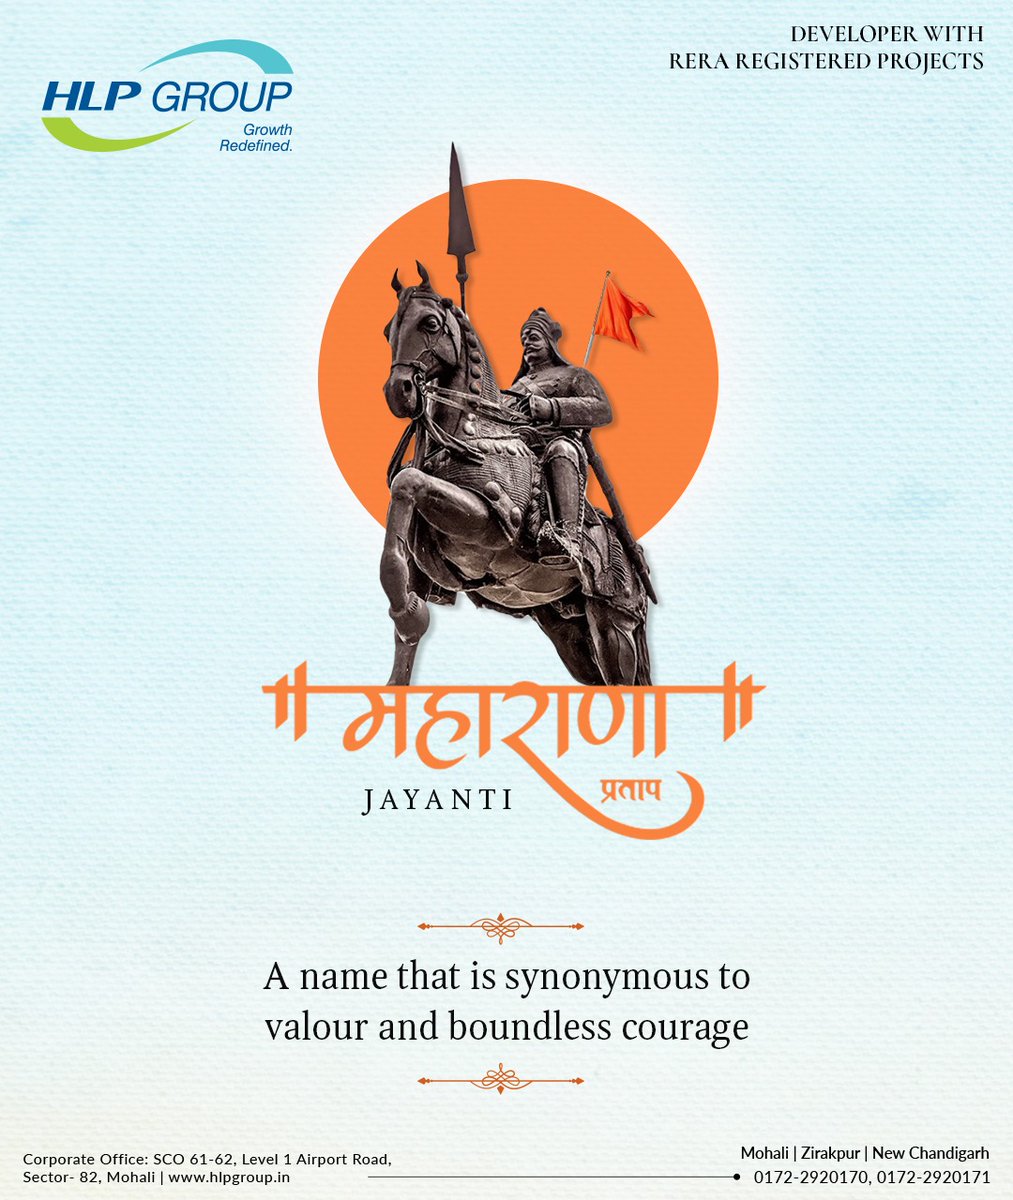 Today, we commemorate the life and legacy of a true warrior king whose name resounds with tales of unmatched courage. 

#HLPGroup #HLPSocialSquare #HLPGalleria #HLPPalmillas #MaharanaPratapJayanti #MaharanaPratap #LegacyOfBravery #Courage #GreatWarrior #BraveHeart #ProudIndian